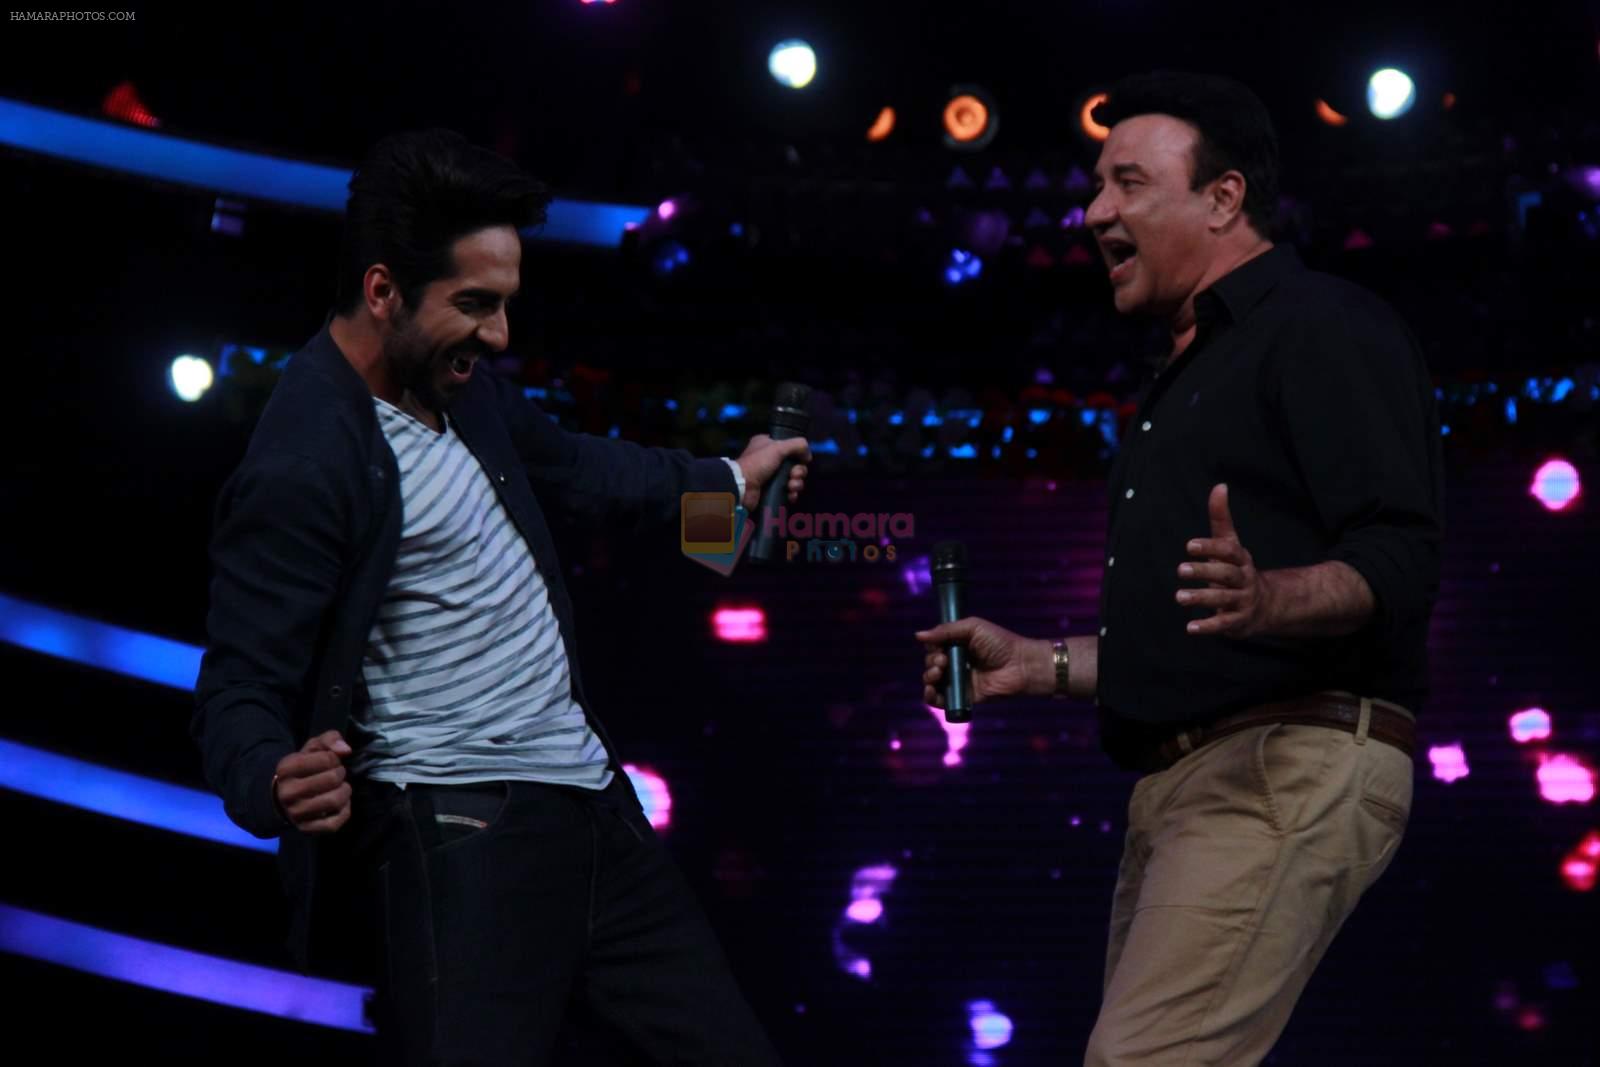 Ayushmann Khurrana, Anu Malik on the sets of Lil Champs in Famous on 24th Feb 2015